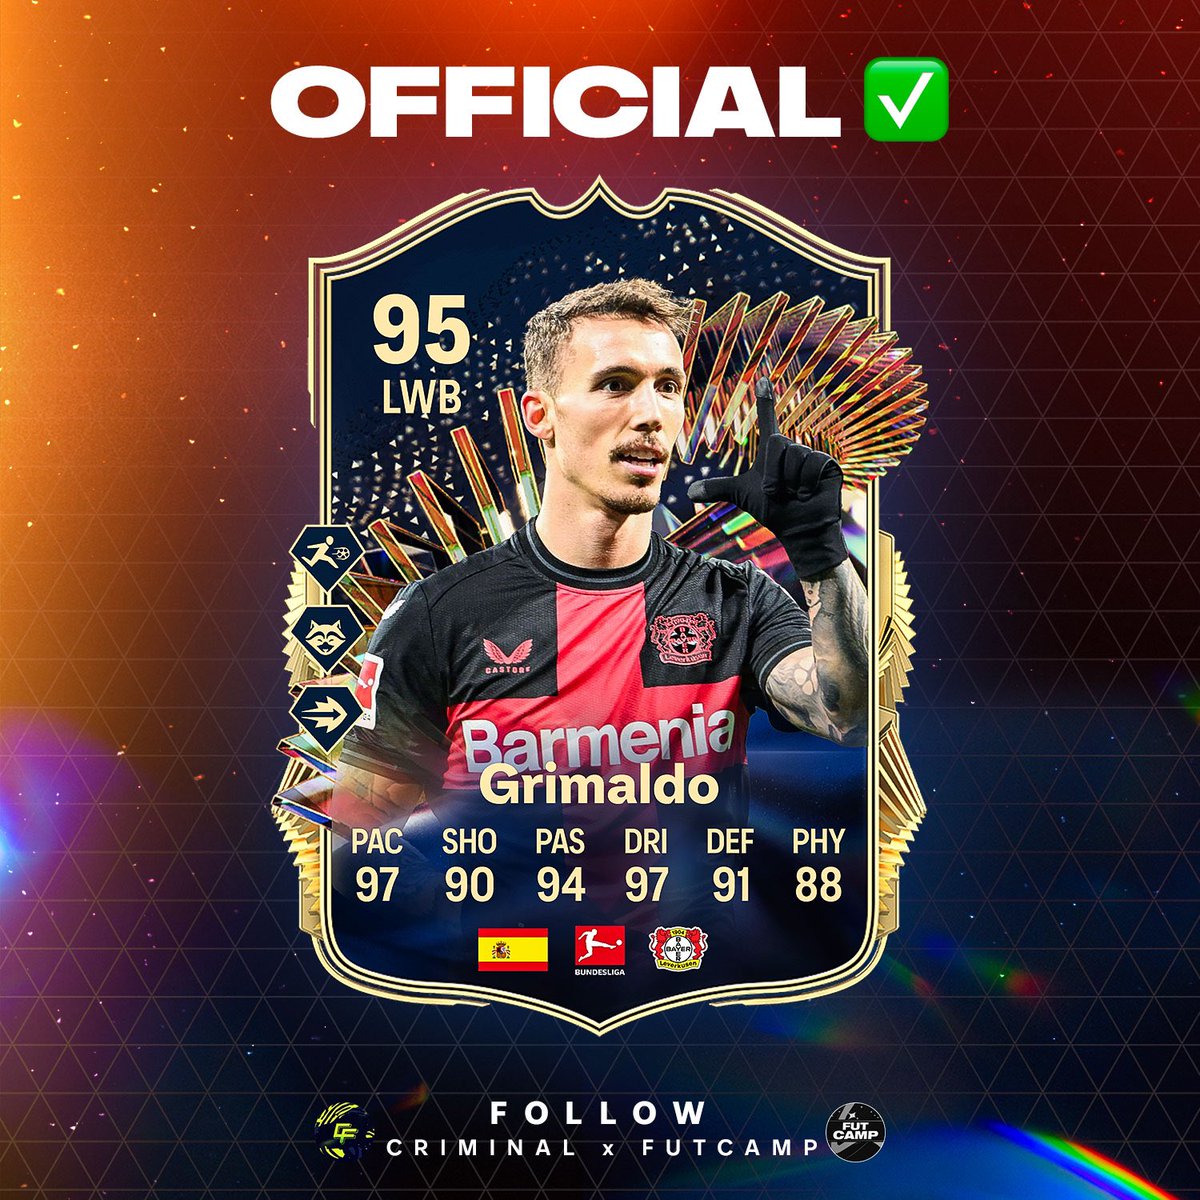 GRIMALDO TOTS OFFICIAL CARD 🌟 WWWW @grimaldo35 🔥🔥 Stats ✅ PS+ ✅ Dynamic ✅ Collab with @Criminal__x 🎨 Make sure to follow @fut_camp for more leaks 🔔